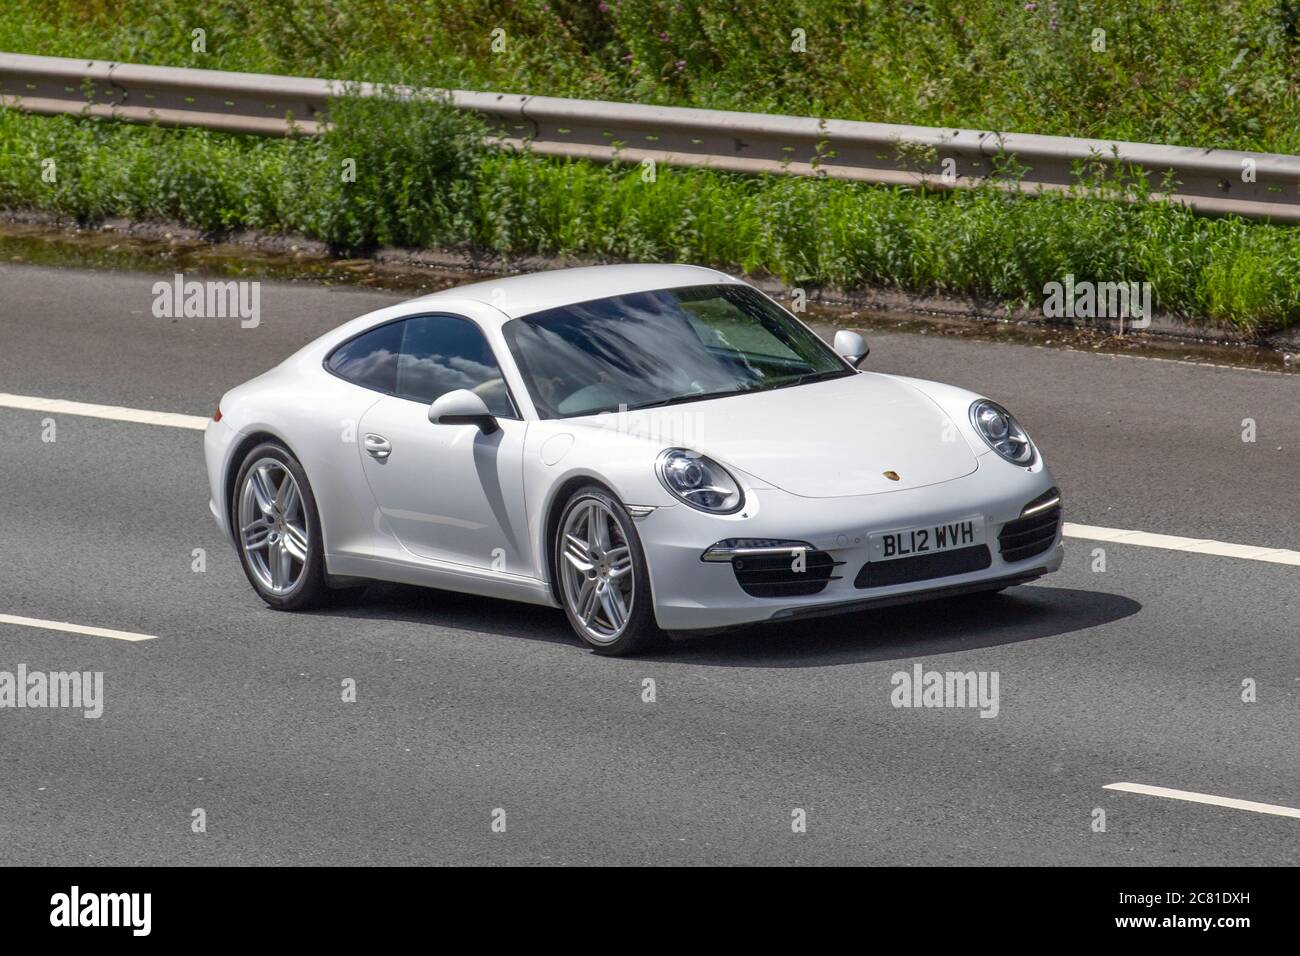 2012 Porsche 911 Carrera S-A; Vehicular traffic moving vehicles, cars driving vehicle on UK roads, motors, motoring on the M6 motorway highway network. Stock Photo